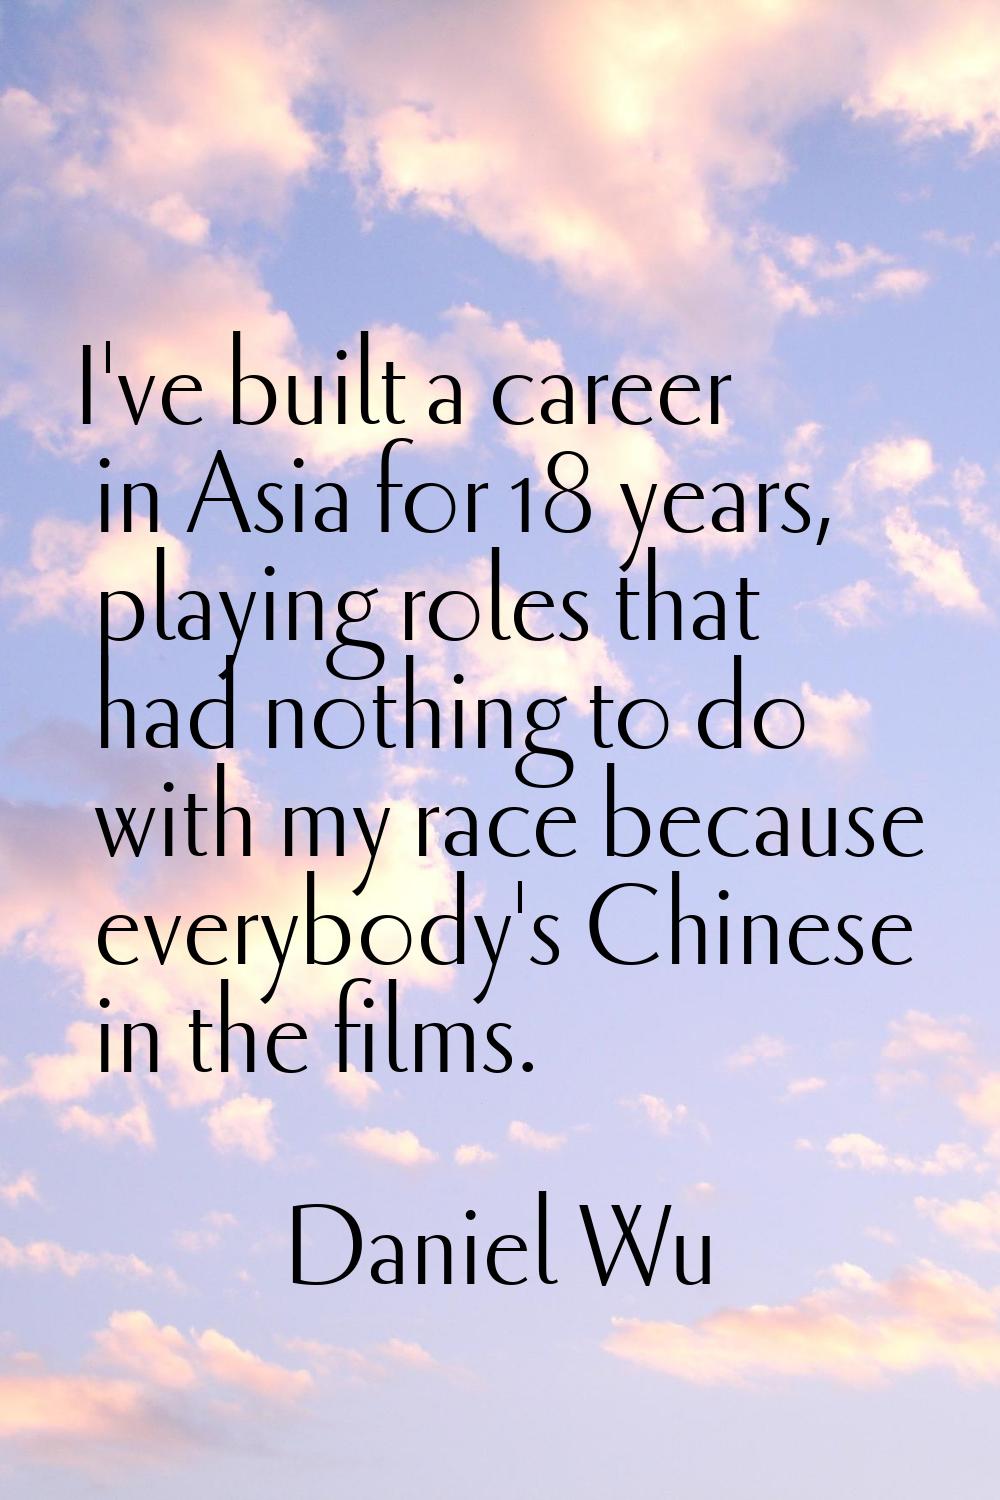 I've built a career in Asia for 18 years, playing roles that had nothing to do with my race because